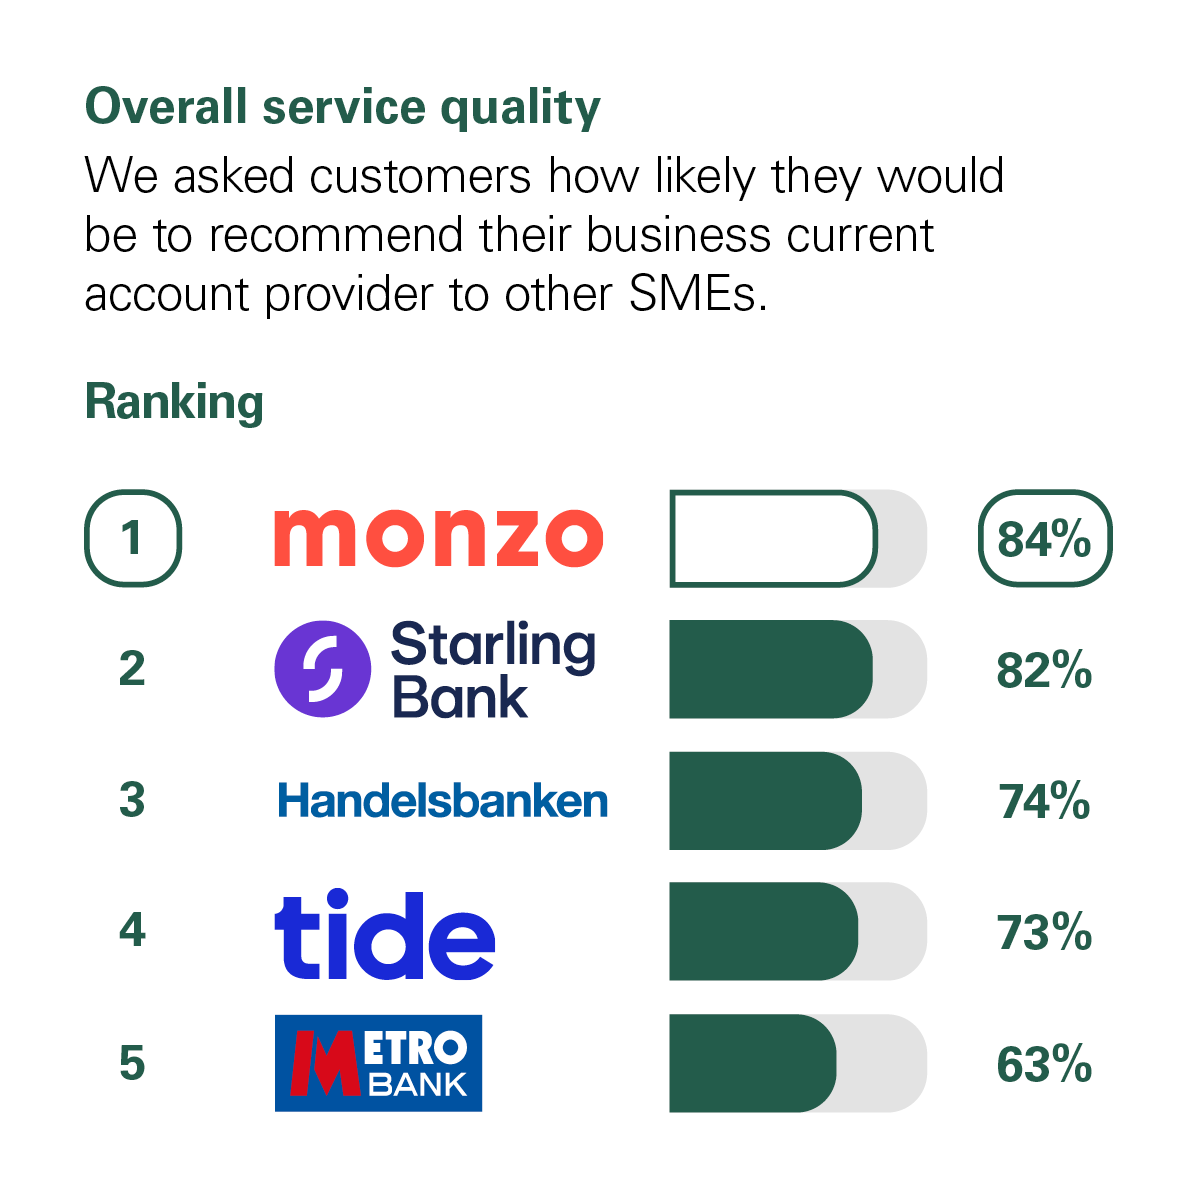 Graph showing the results of the CMA scoring of UK banks in the Overall Service Quality category. The CMA asked customers how likely they would be to recommend their personal current account provider to other small and medium-sized enterprises (SMEs*). The rankings with percentage scores are: 1st Monzo with 84%. 2nd Starling Bank with 82%. 3rd Handelsbanken with 74%. 4th Tide with 73%. 5th Metro Bank with 63%.